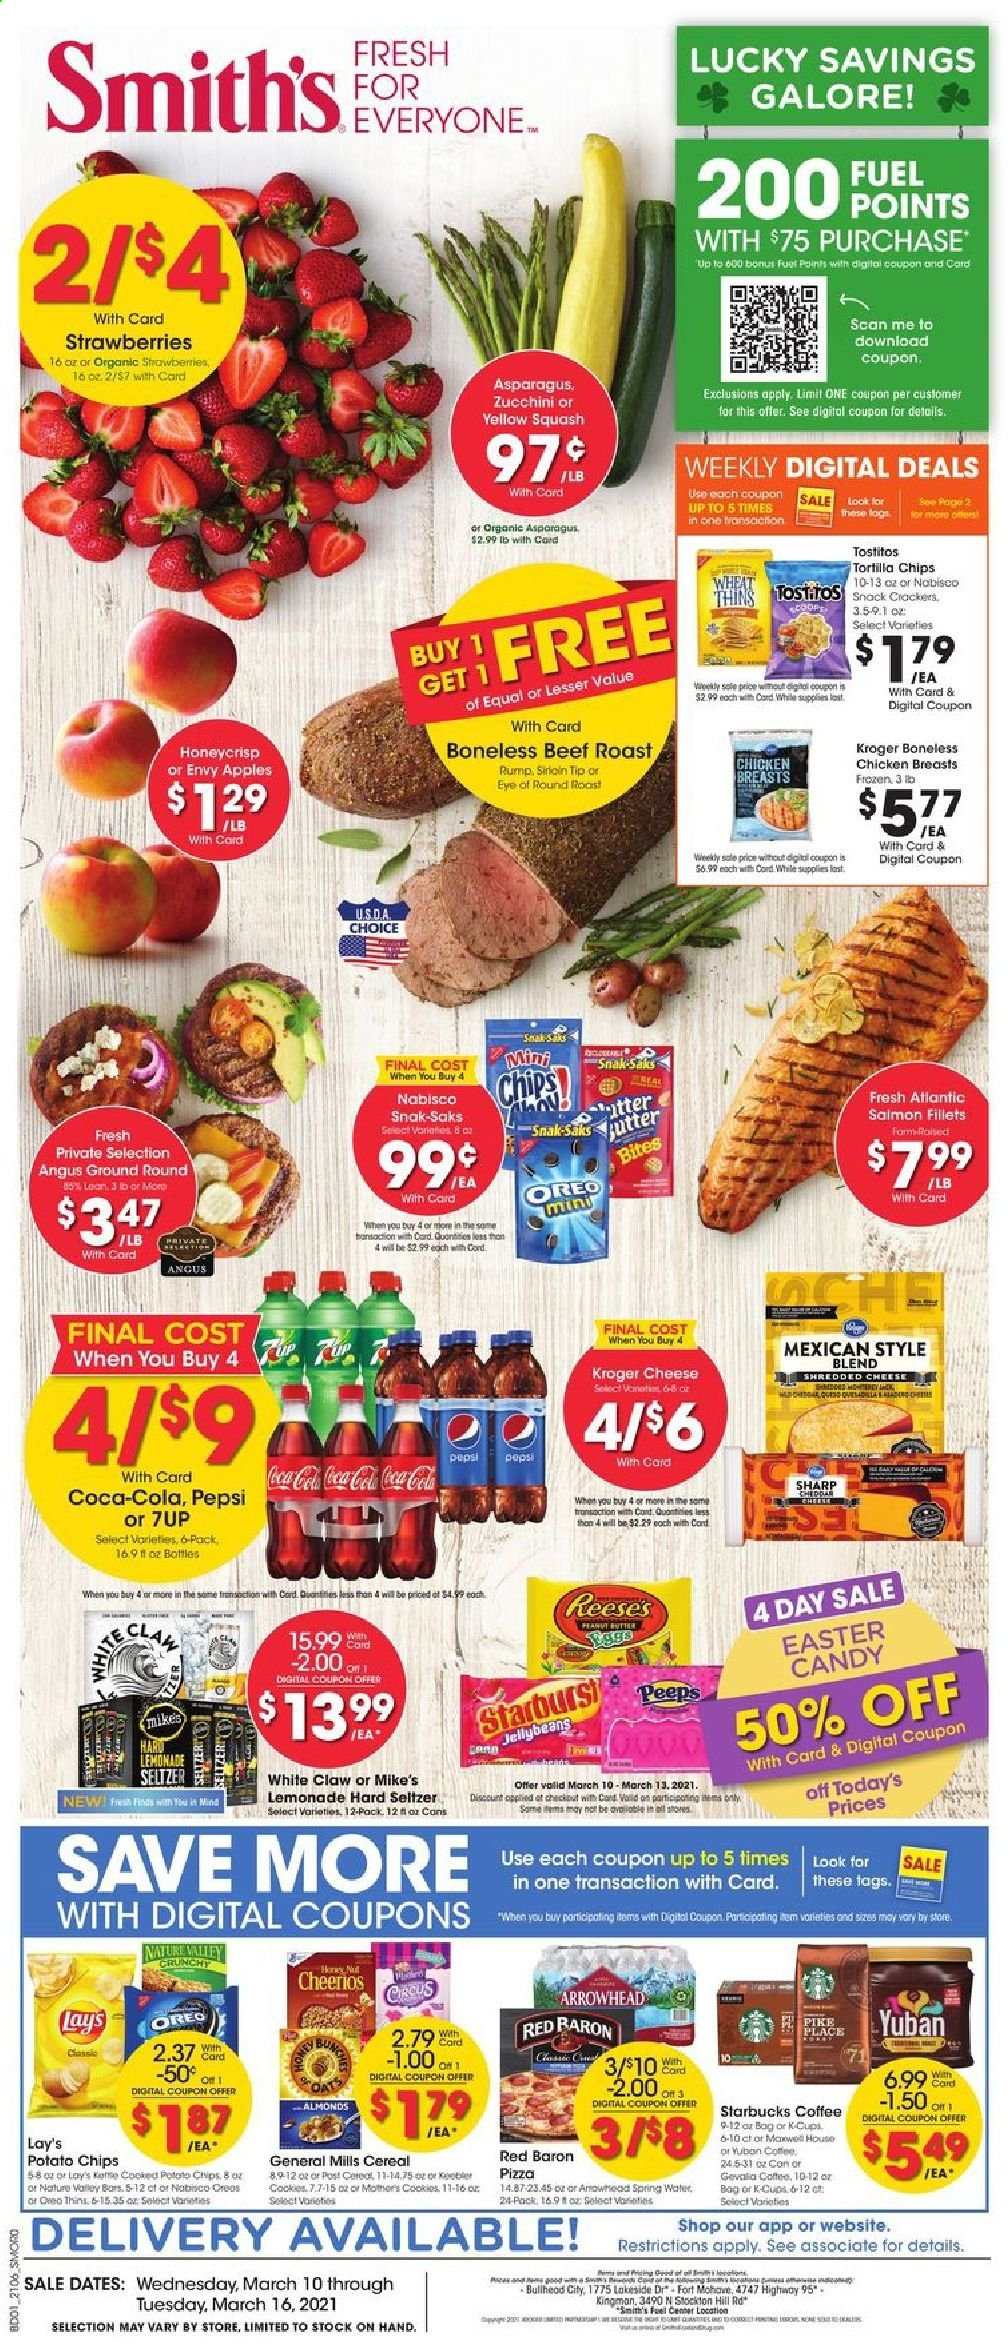 thumbnail - Smith's Flyer - 03/10/2021 - 03/16/2021 - Sales products - apples, salmon, salmon fillet, pizza, chicken roast, shredded cheese, Oreo, Reese's, strawberries, zucchini, Red Baron, cookies, Peeps, tortilla chips, potato chips, snack, Lay’s, Smith's, Thins, Tostitos, cereals, Cheerios, Nature Valley, almonds, Coca-Cola, lemonade, Pepsi, 7UP, seltzer water, spring water, coffee, Starbucks, coffee capsules, L'Or, K-Cups, Gevalia, White Claw, Hard Seltzer, chicken breasts, beef meat, eye of round, round roast, roast beef, Sharp. Page 1.